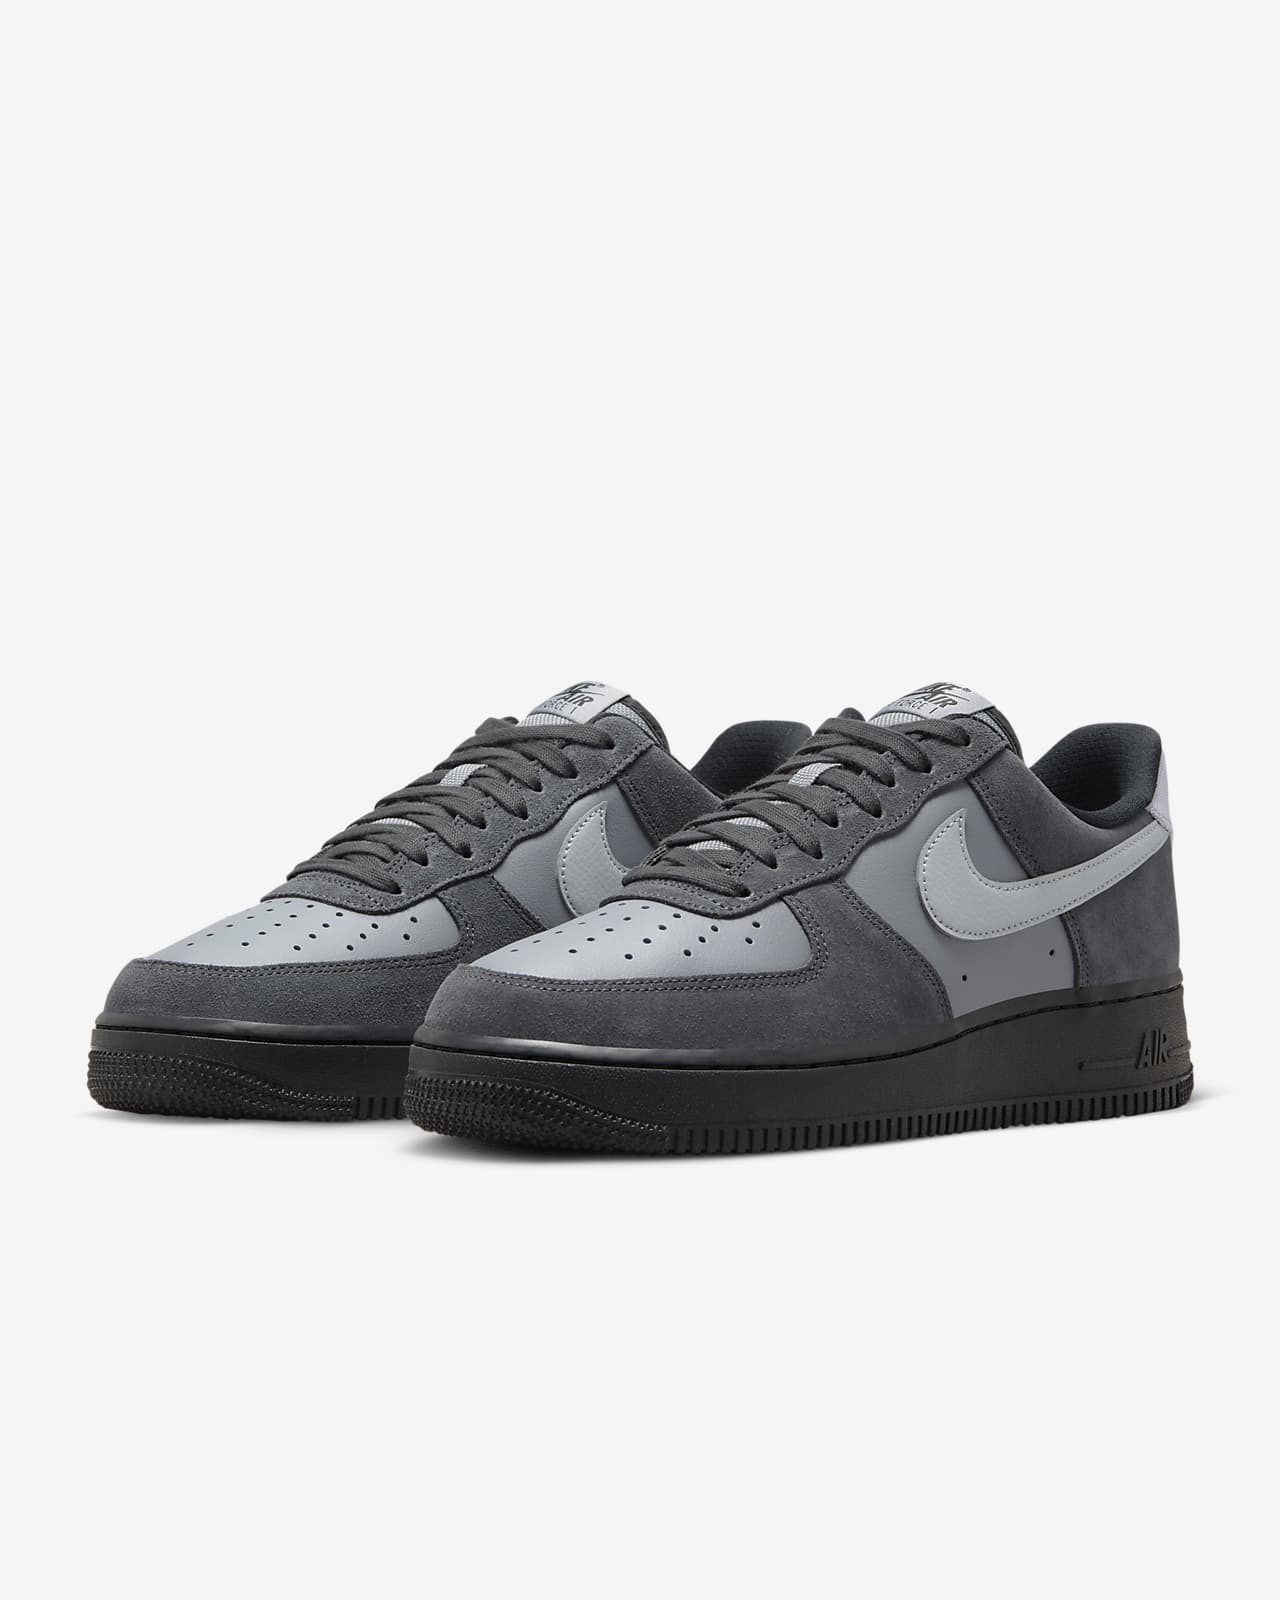 Nike Air Force 1 07 Mid LV8 Men's Shoe Size 8.5 (Wolf Grey)